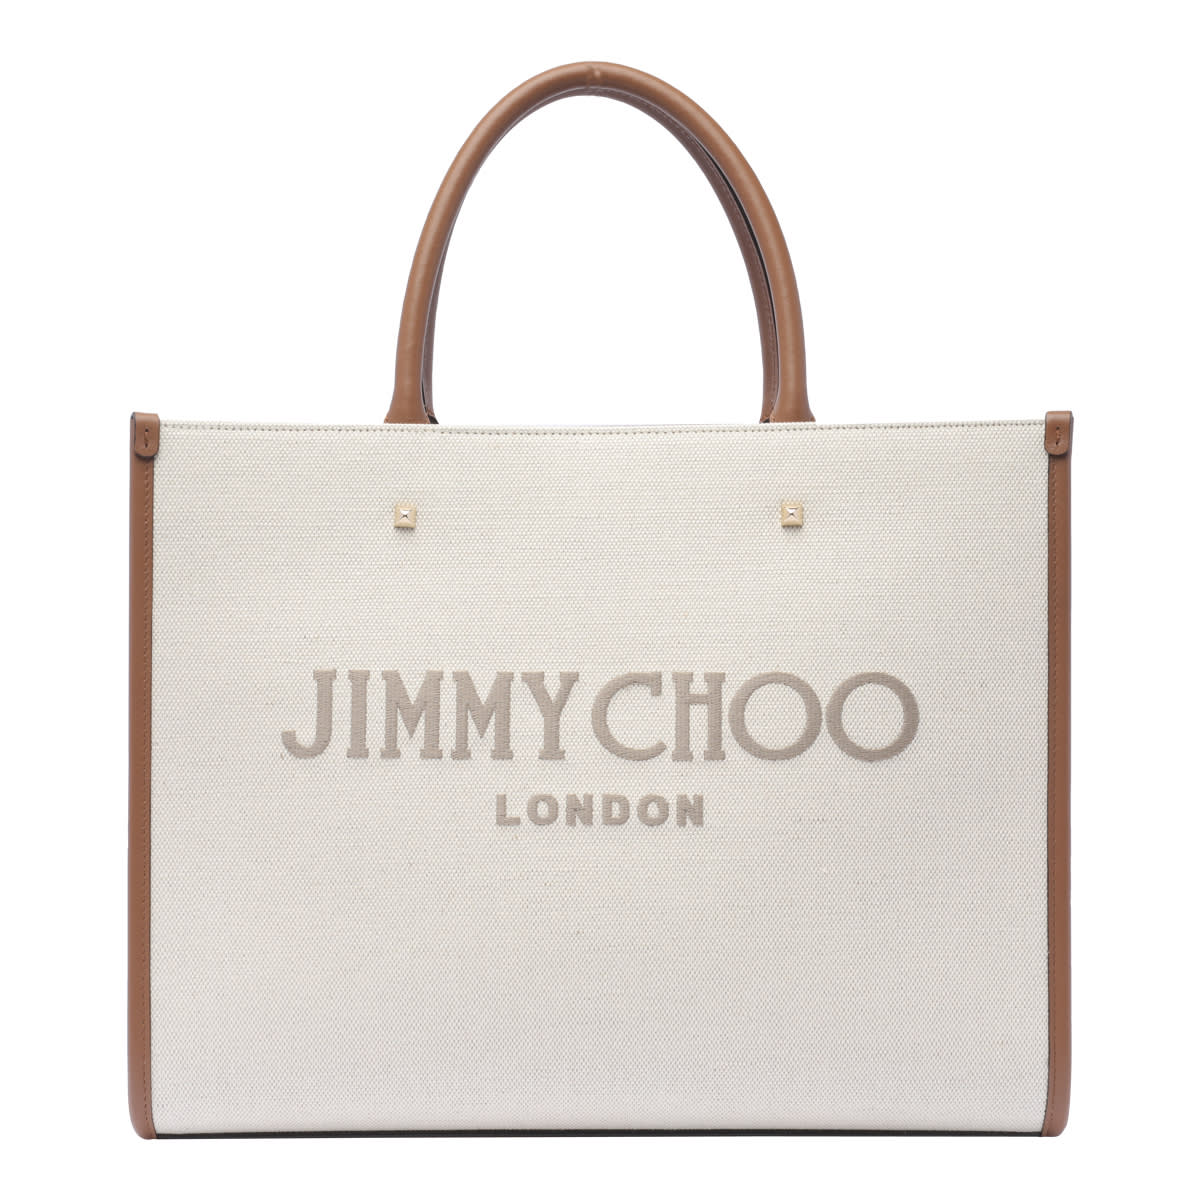 9 Trending Models of Jimmy Choo Bags for Women | Styles At Life